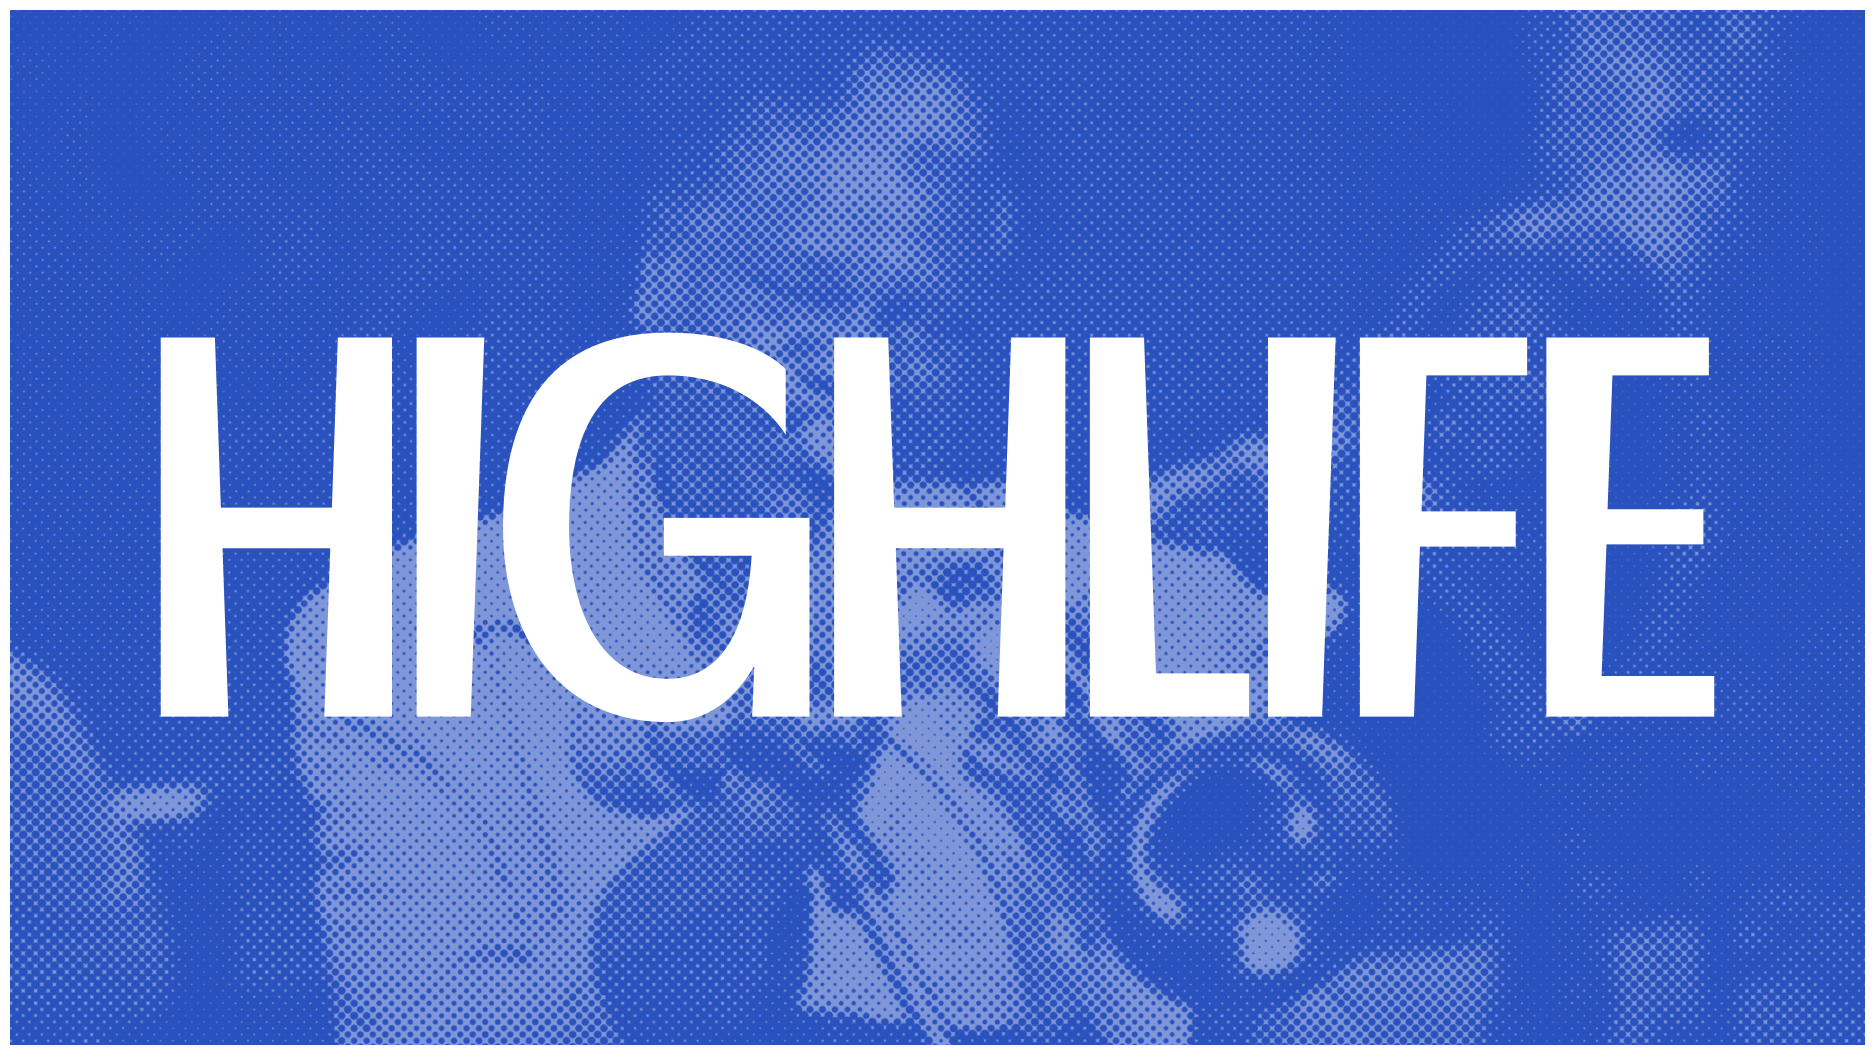 MA Communications Design work by Zeke Oy showing the word Highlife on a blue background.